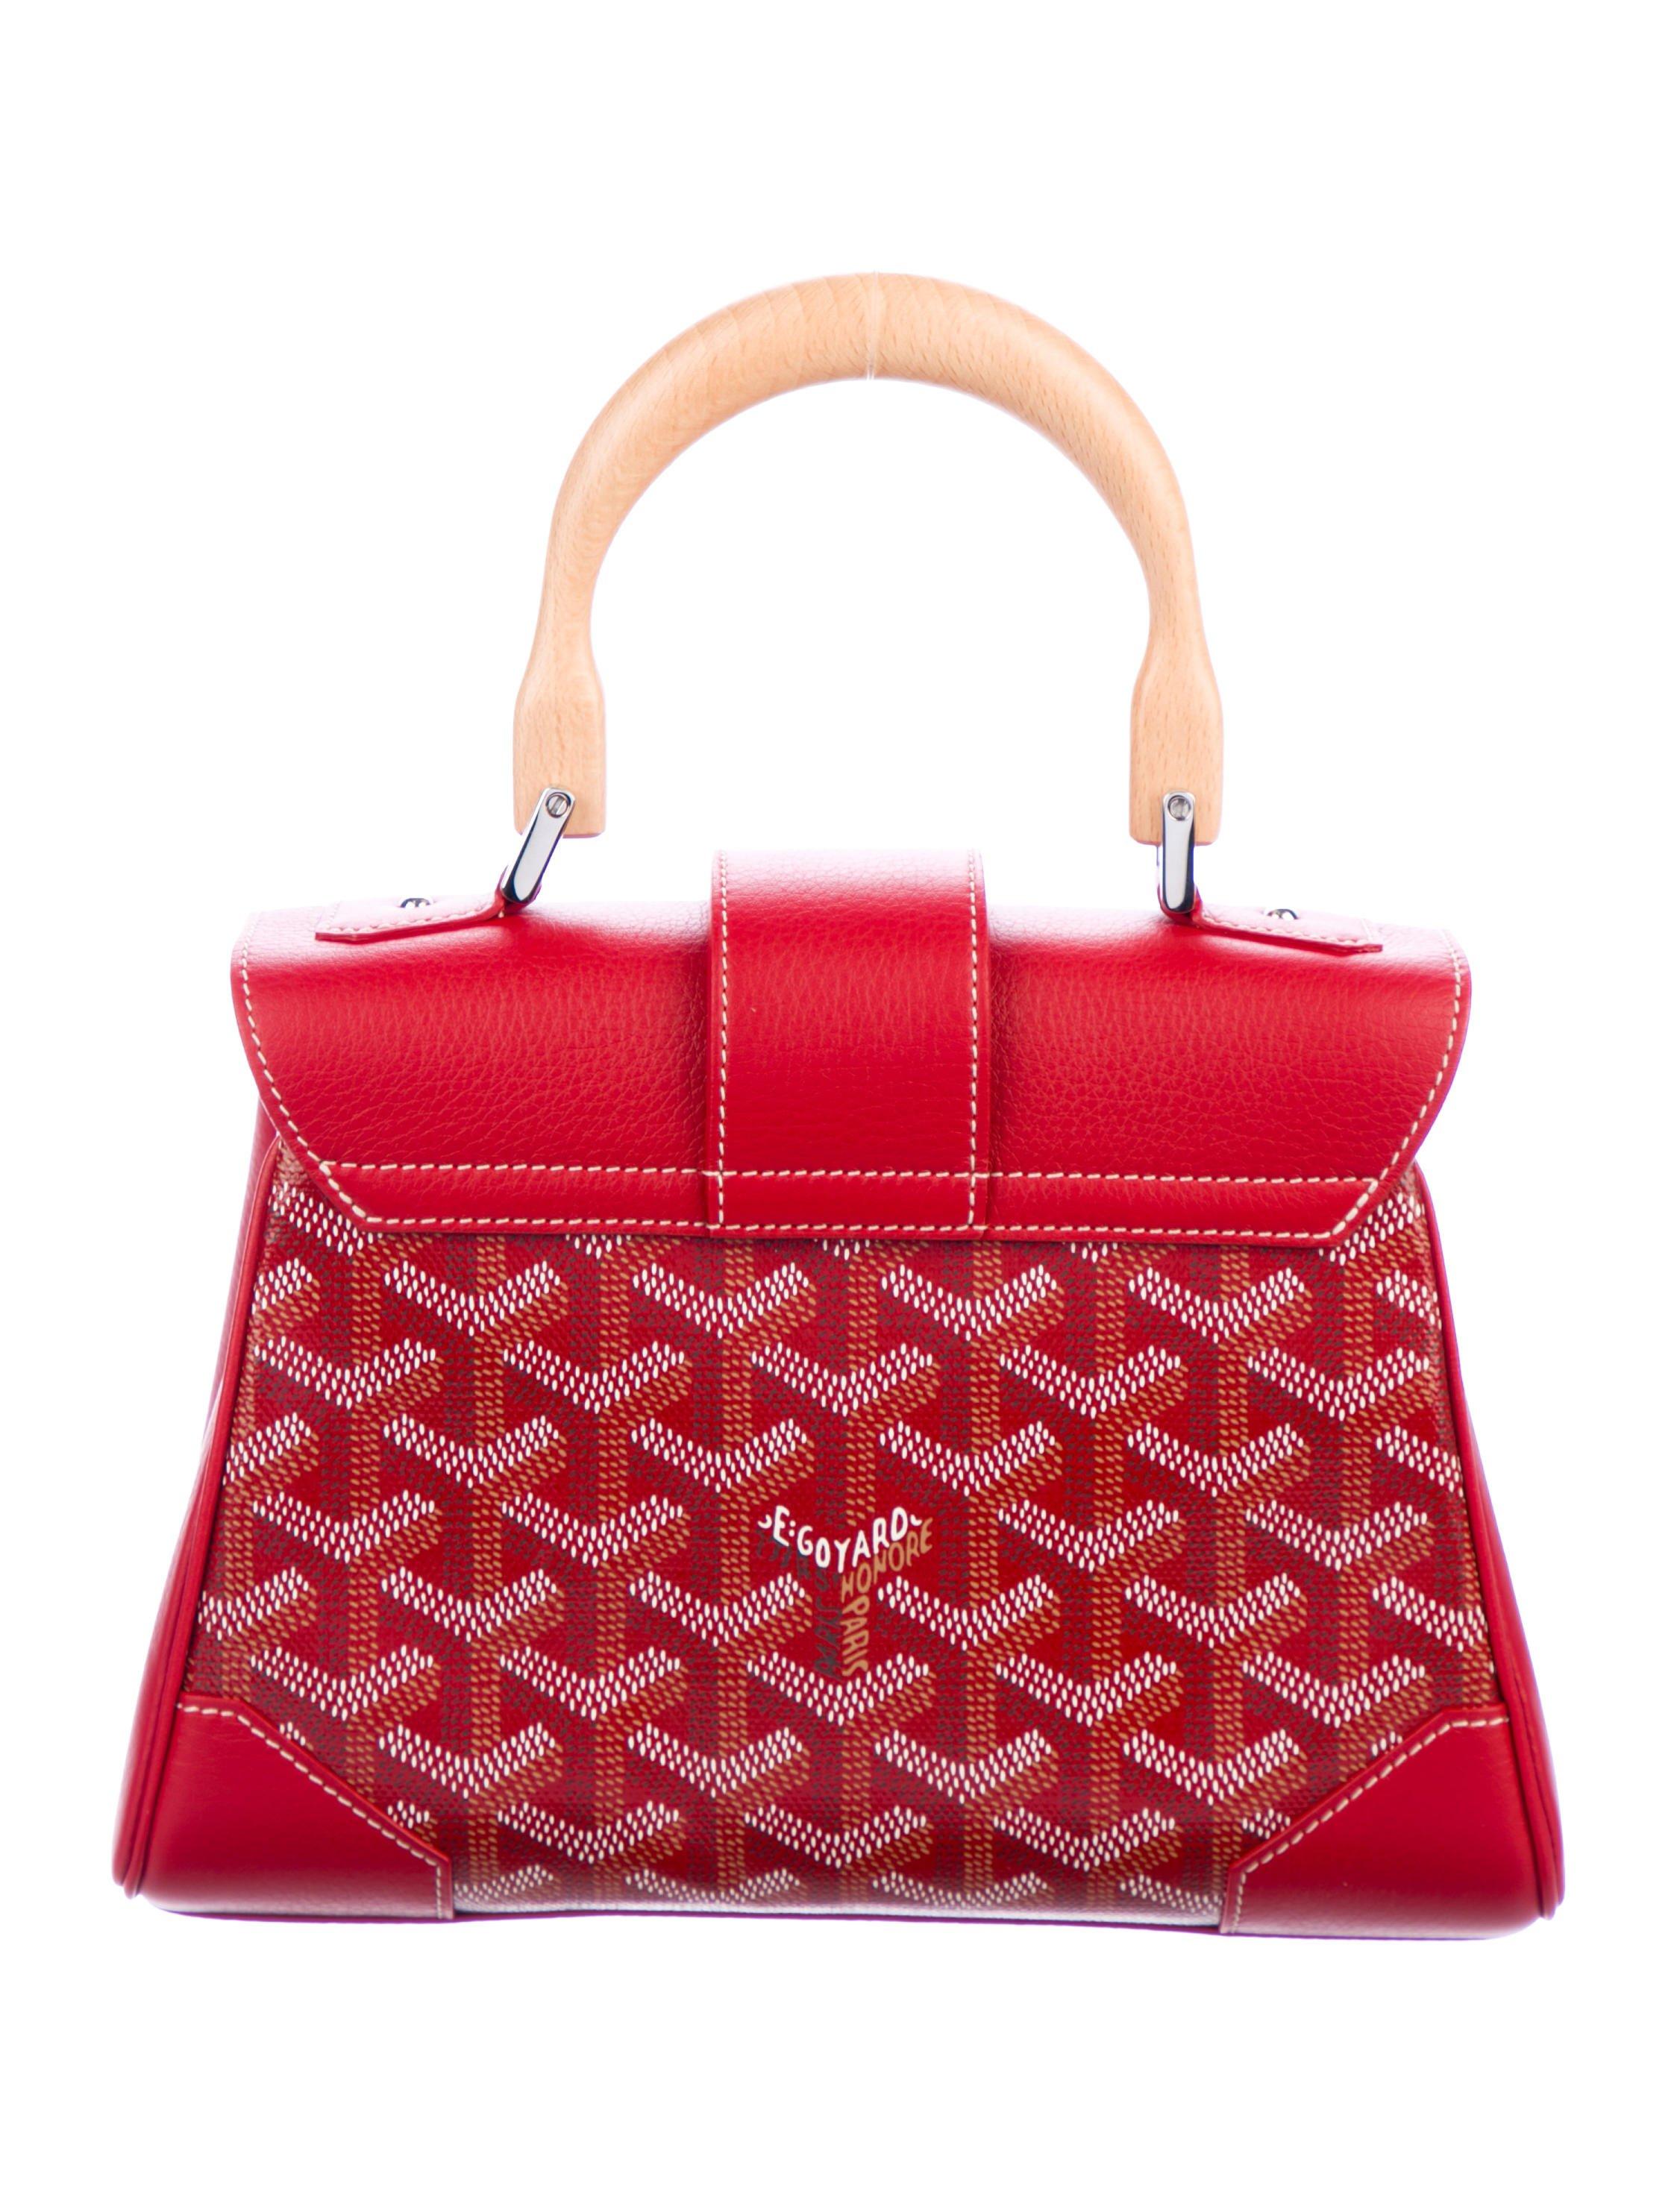 Goyard NEW Red Monogram Logo Leather Kelly Style Top Handle Satchel Bag in Box

Monogram canvas
Leather
Wood
Silver tone hardware 
Woven lining
Flap closure
Made in France
Handle drop 3